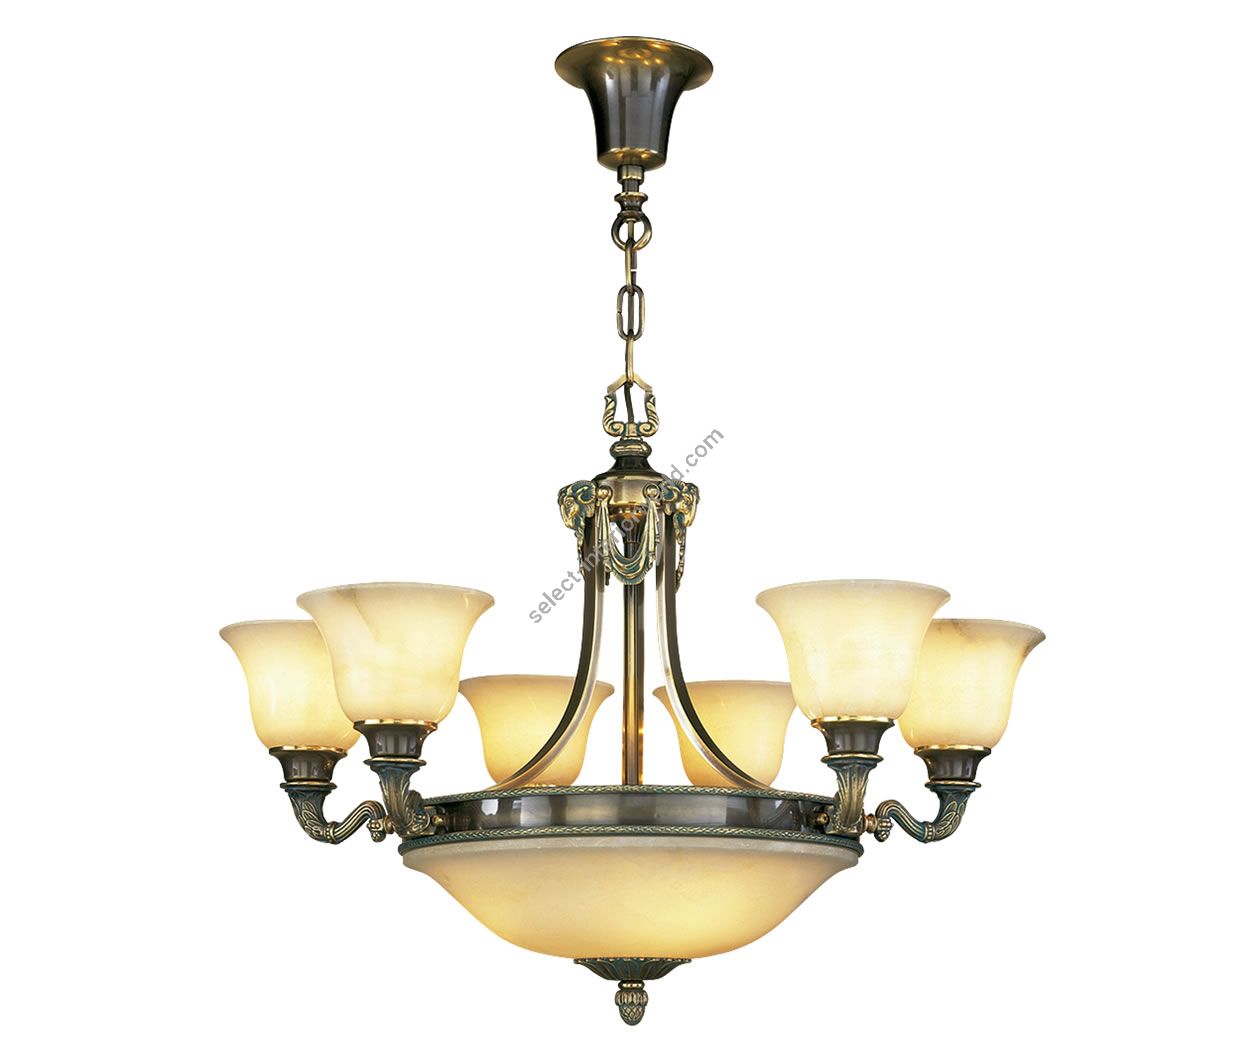 Mariner / Decorative Bronze Chandelier, With Alabaster Dome and Shades / 18696